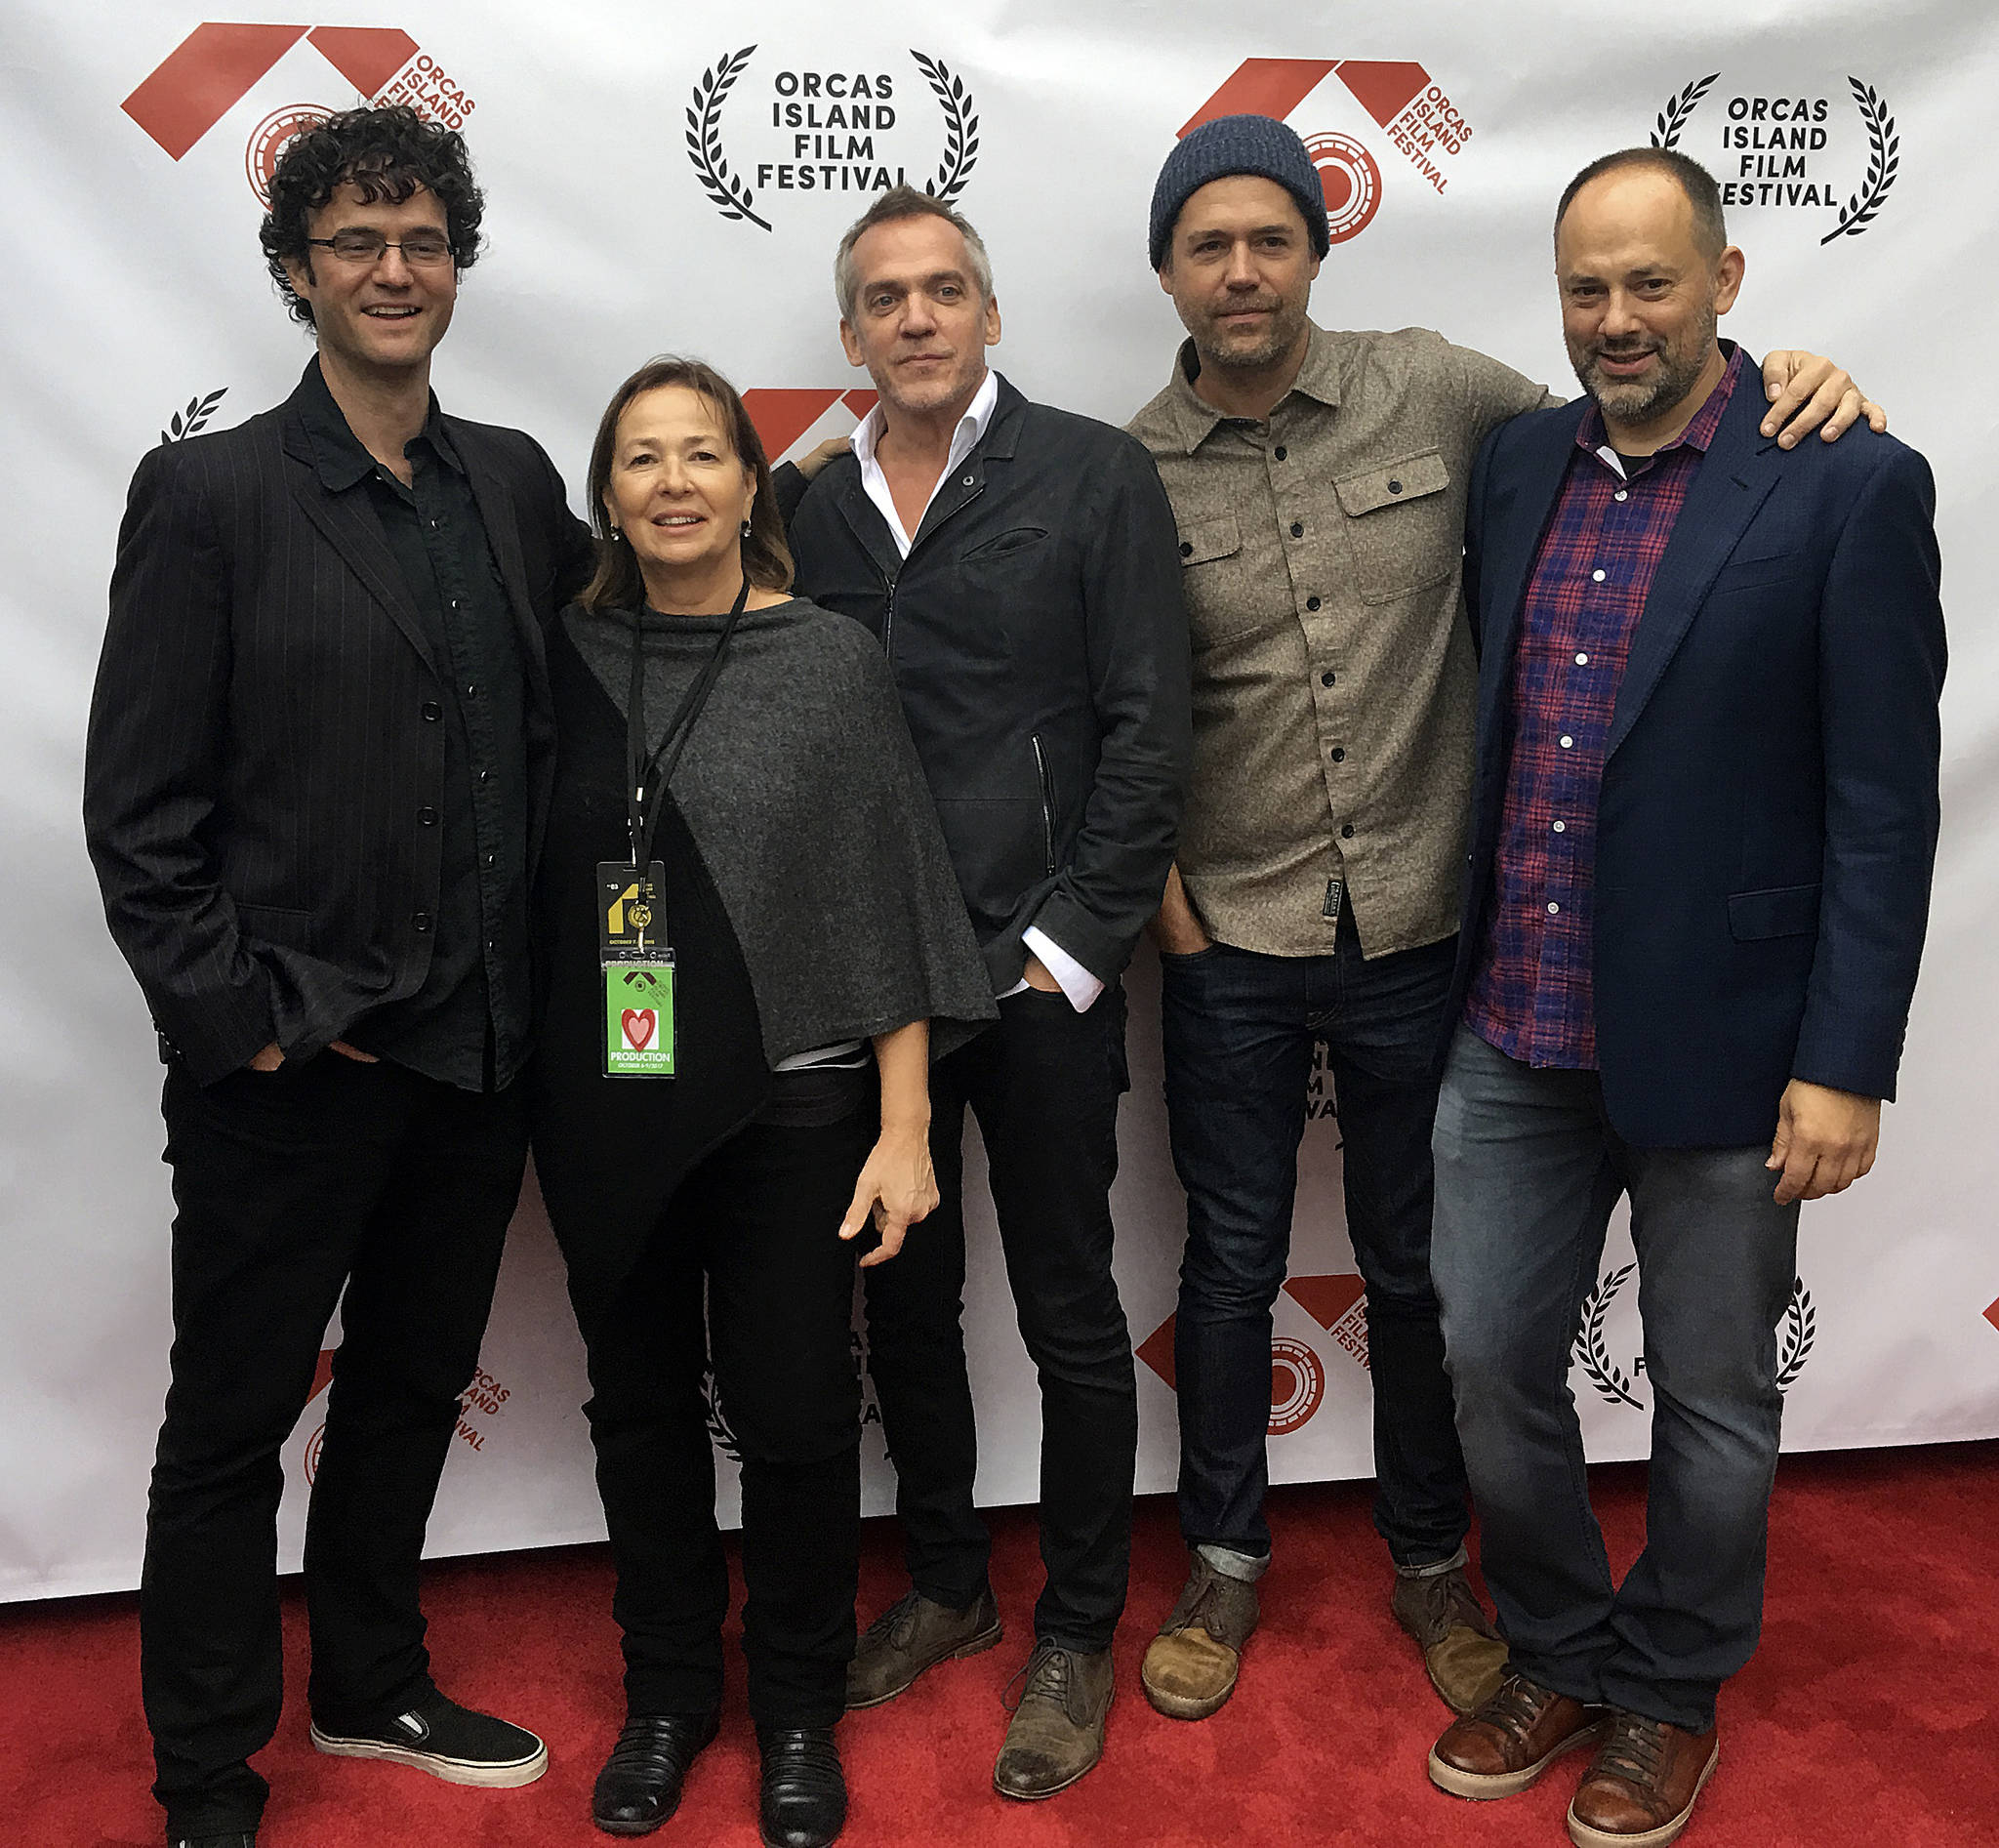 Colleen Smith Armstrong/staff photo                                At left, L-R: Festival directors Jared Lovejoy and Donna Laslo, director Jean-Marc Vallée, screenwriter Bryan Sipe and festival curator Carl Spence.